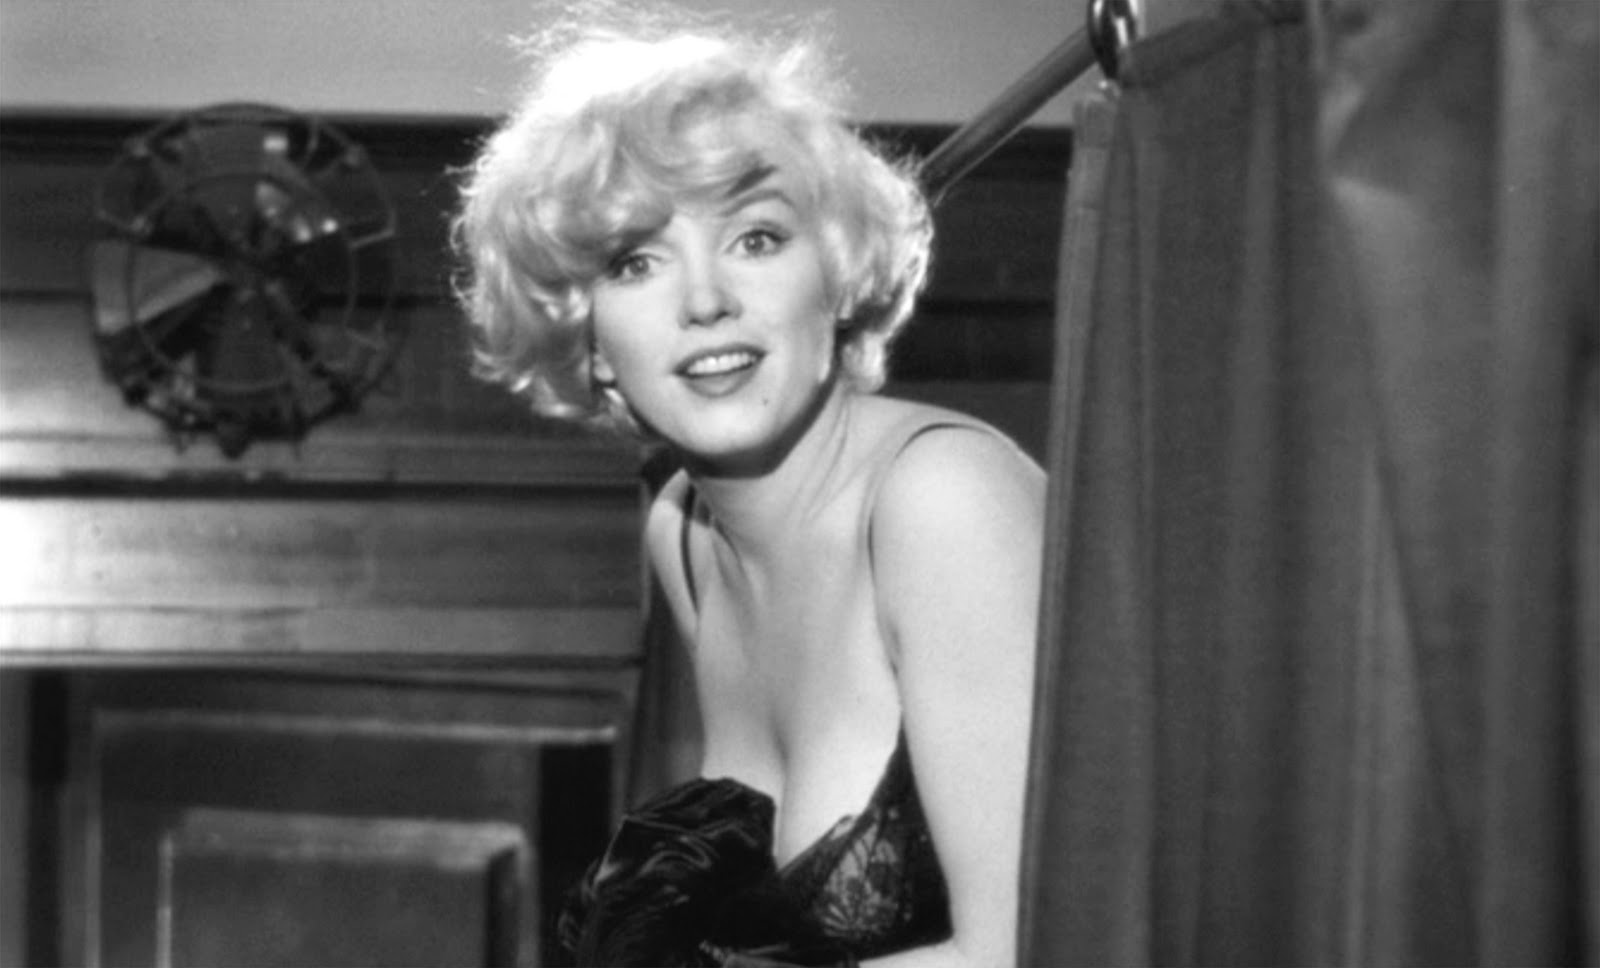 Shocking Things We Learned About Marilyn Monroe After Her Death